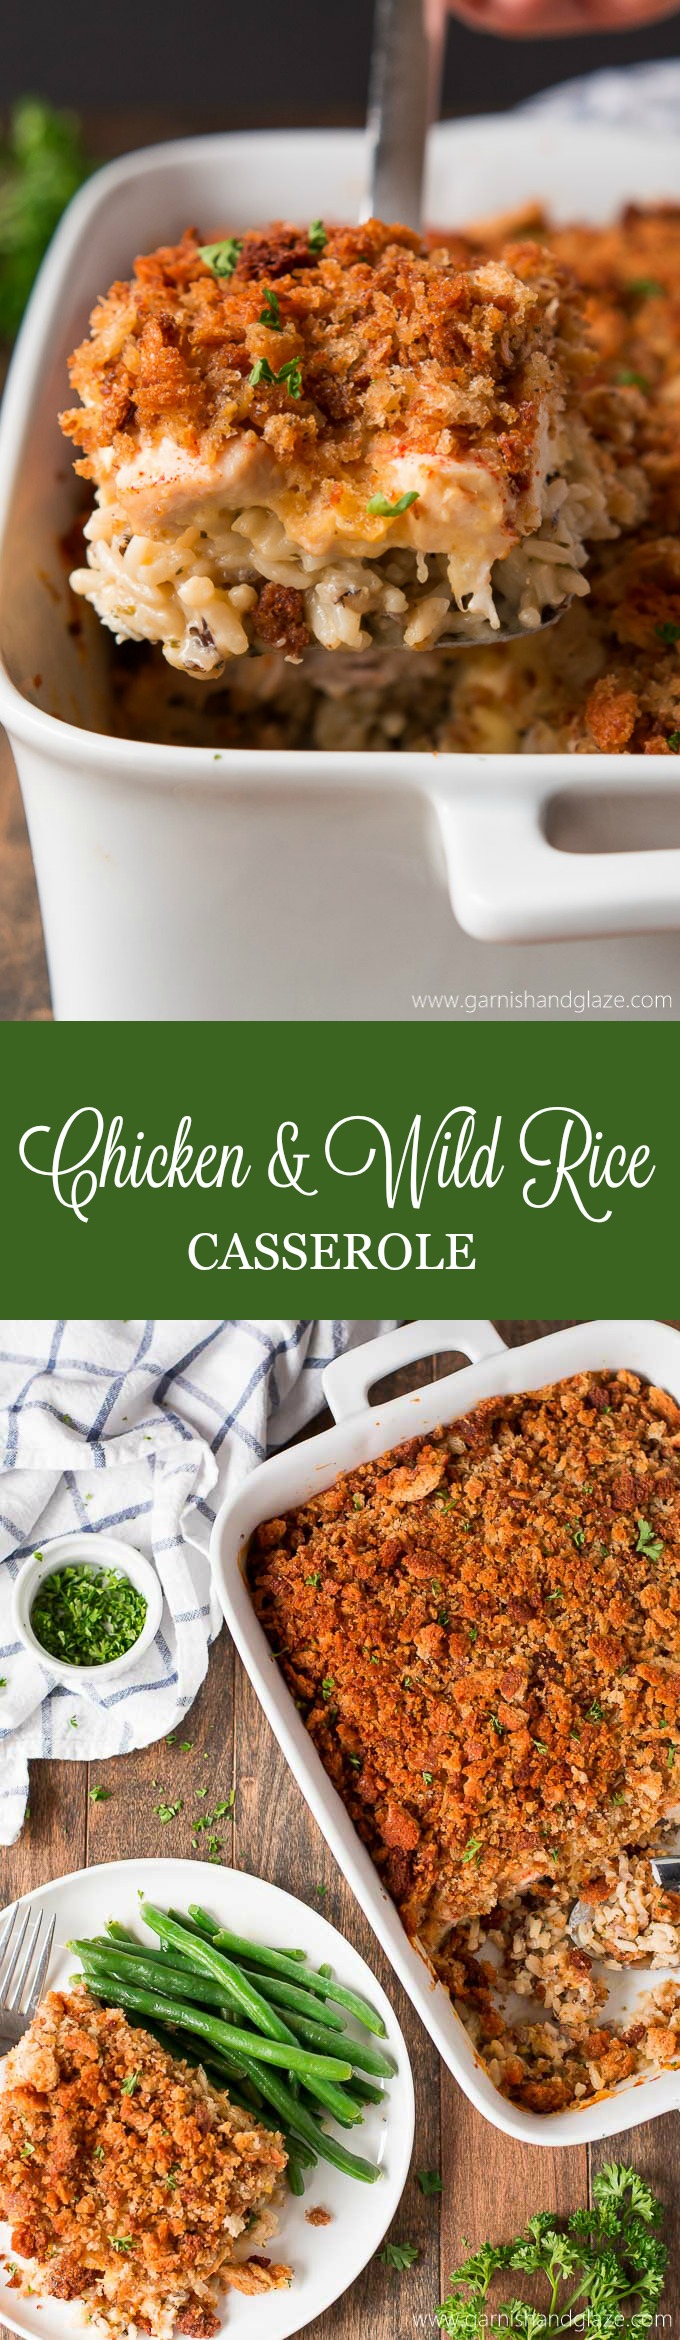 Chicken & Wild Rice Casserole is the ultimate comfort food layered with flavorful rice, chicken, a cheesy sauce, and crispy stuffing. 